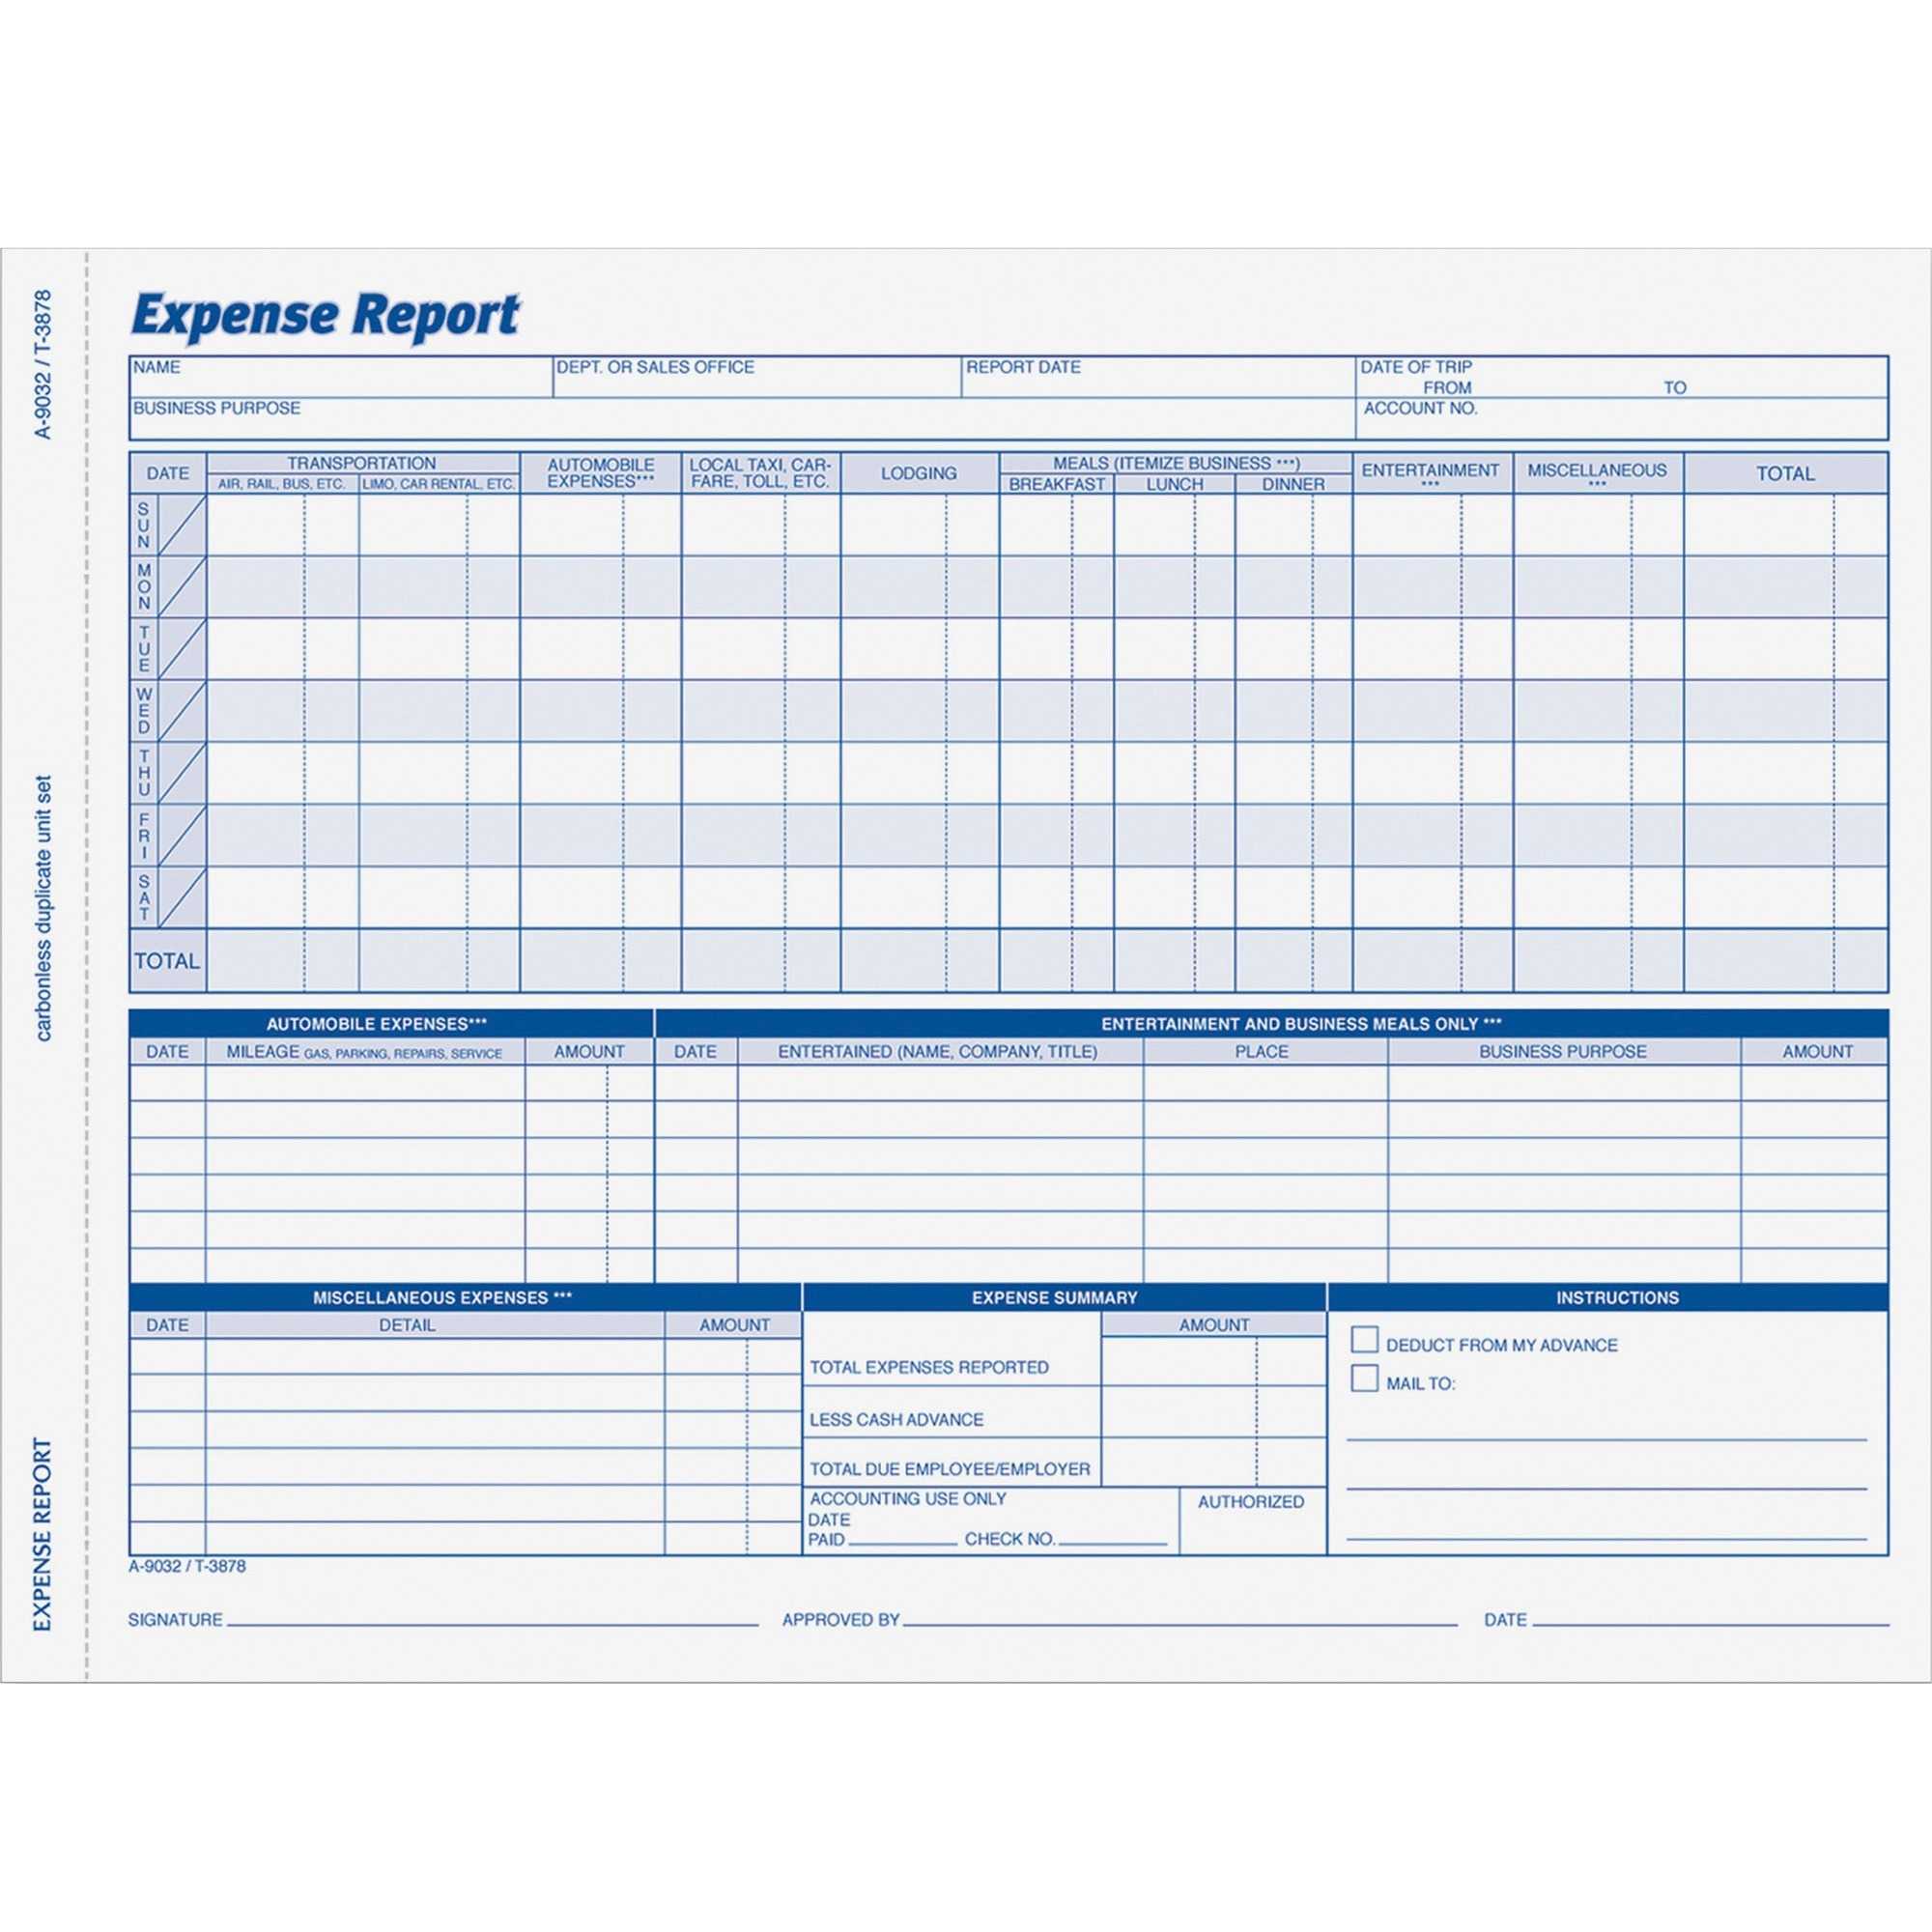 Abf9032Abf Pertaining To Gas Mileage Expense Report Template